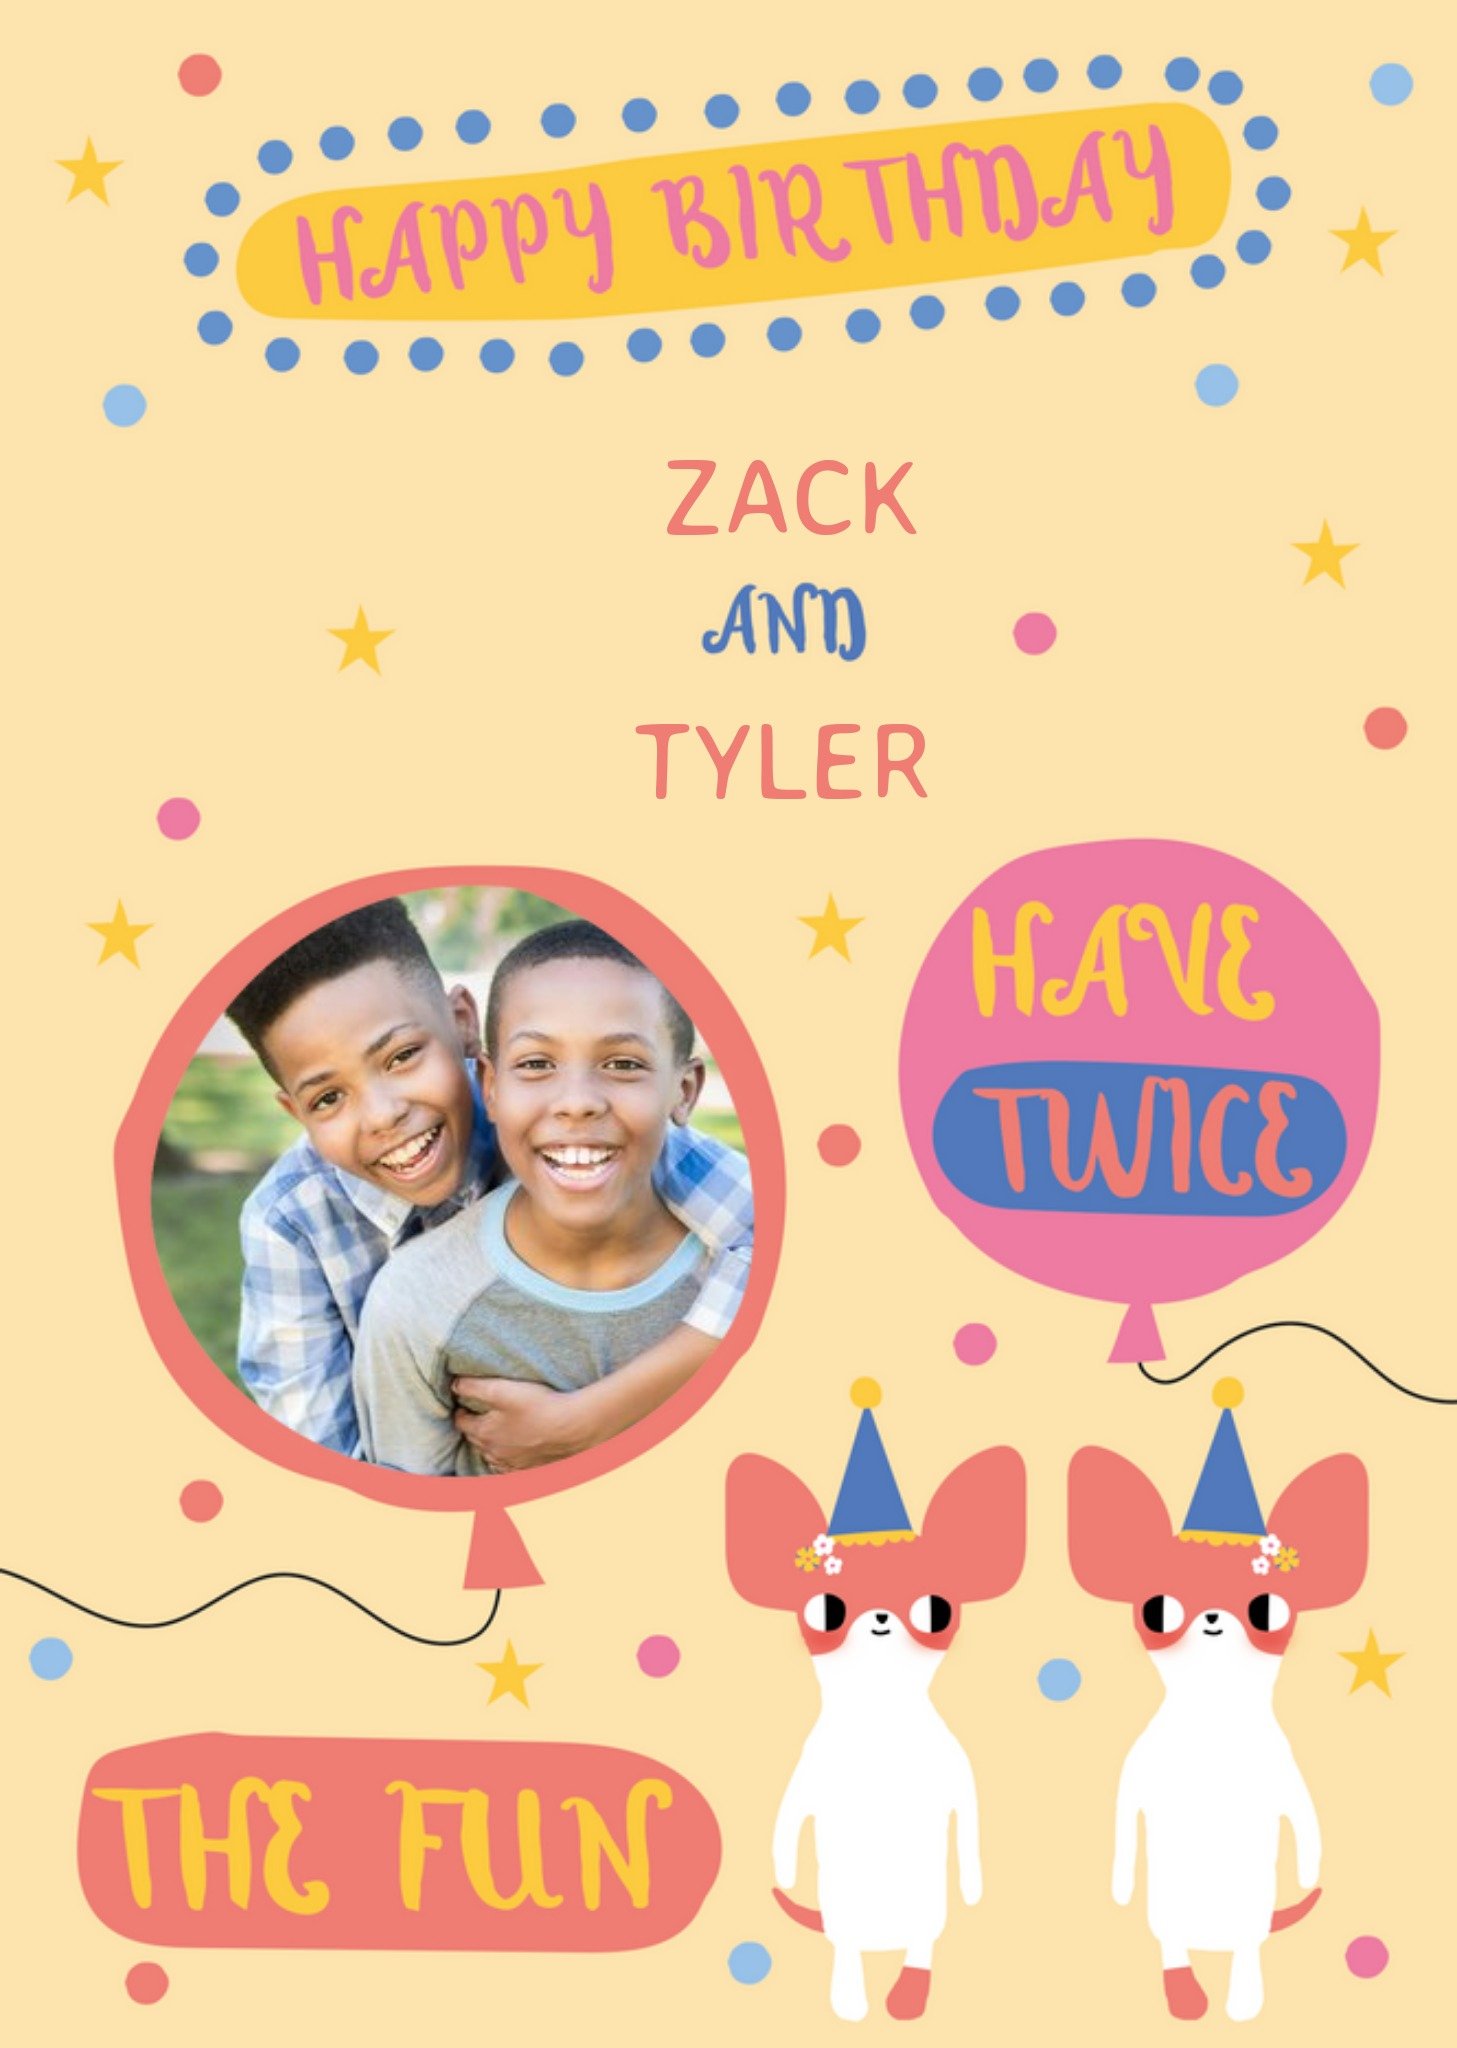 Moonpig Happy Birthday Personalised Names Have Twice The Fun Twins Birthday Card, Large